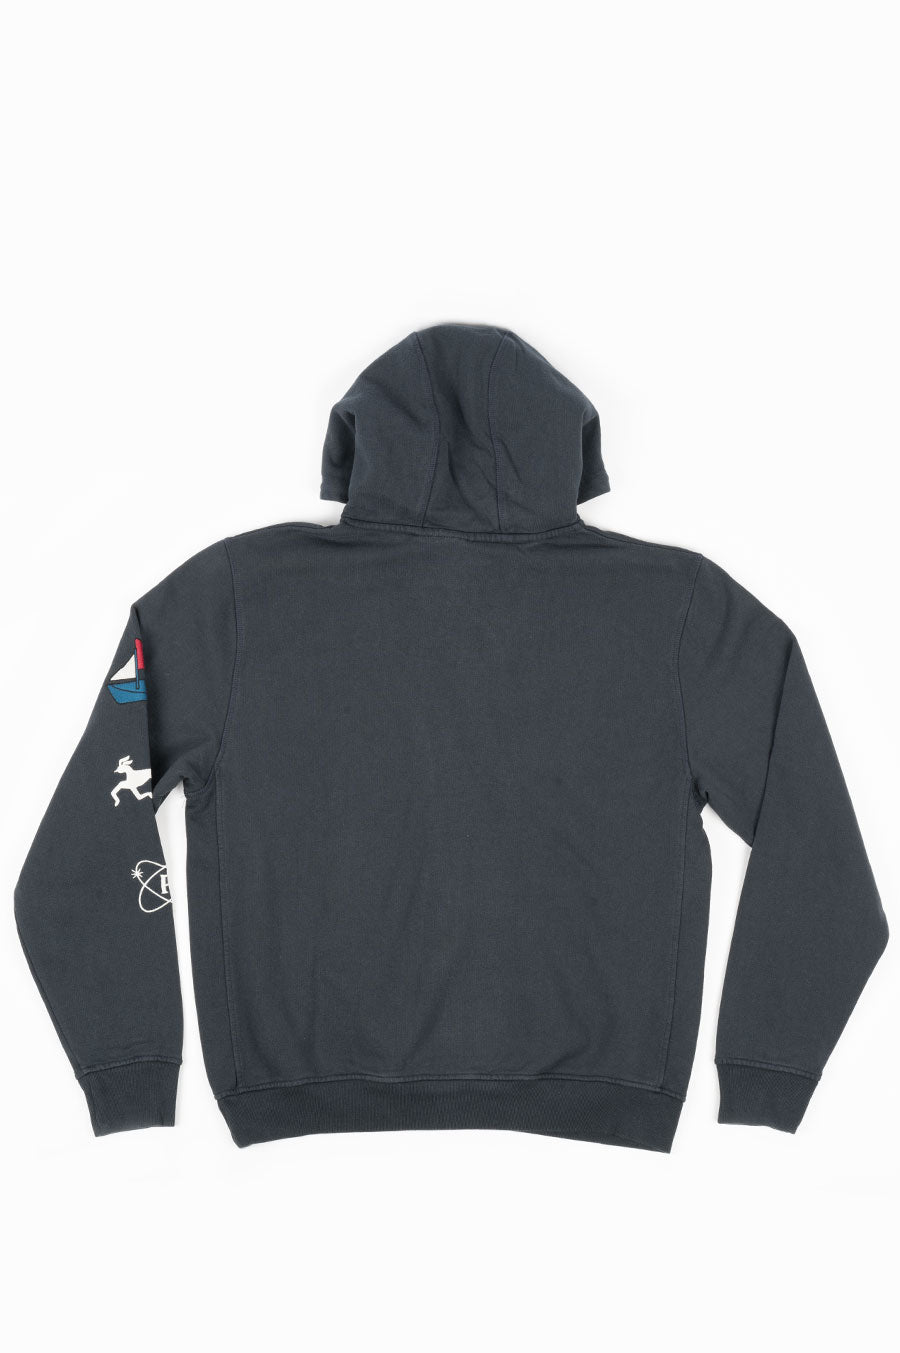 PARRA PAPER DOG SYSTEMS HOODED SWEATSHIRT NAVY